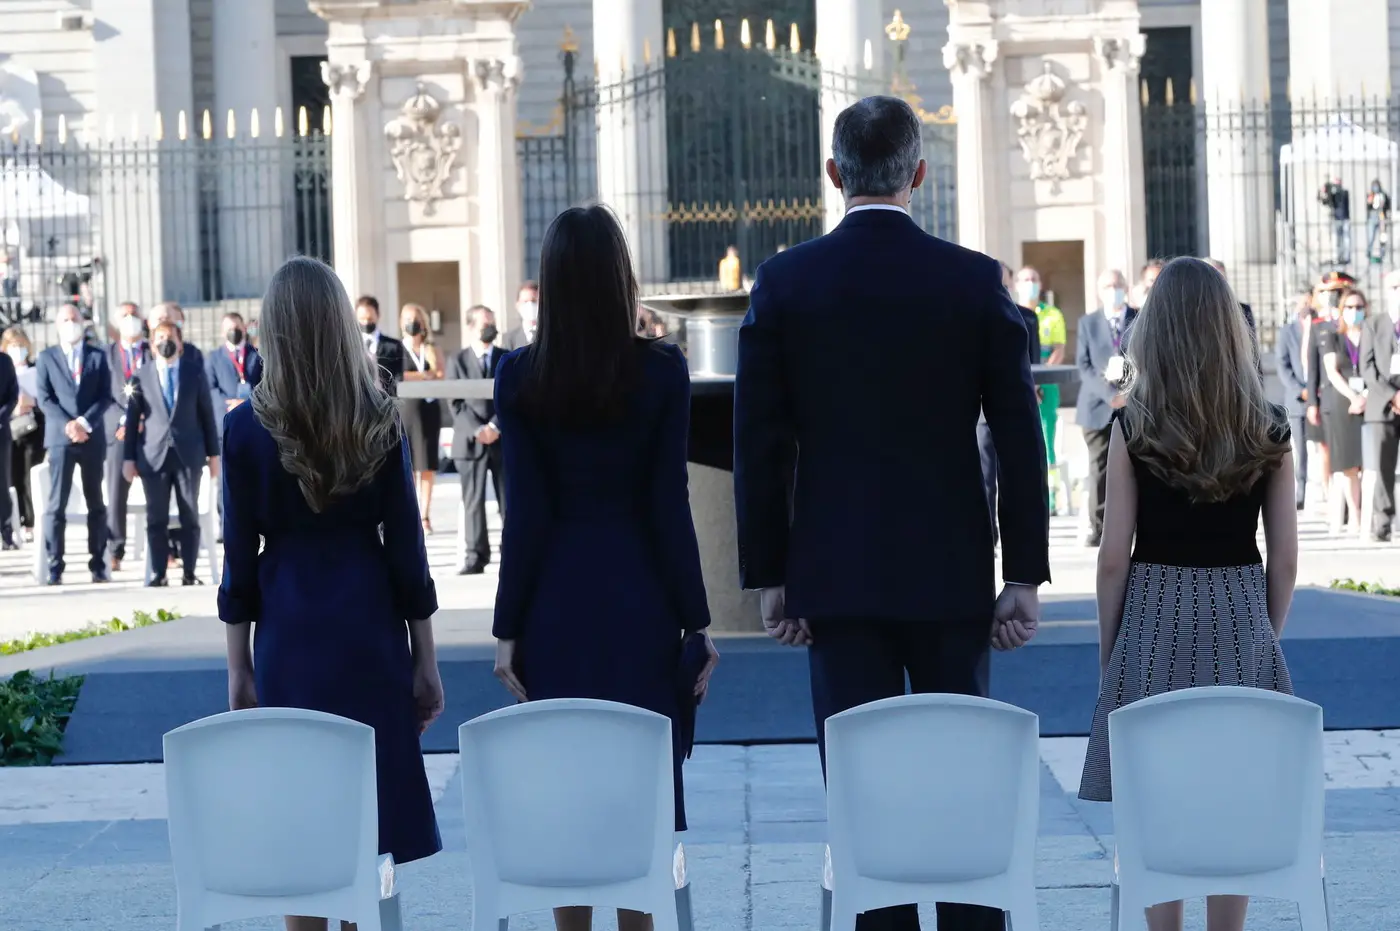 Spanish Royal family paid tribute to the victims of COVId19